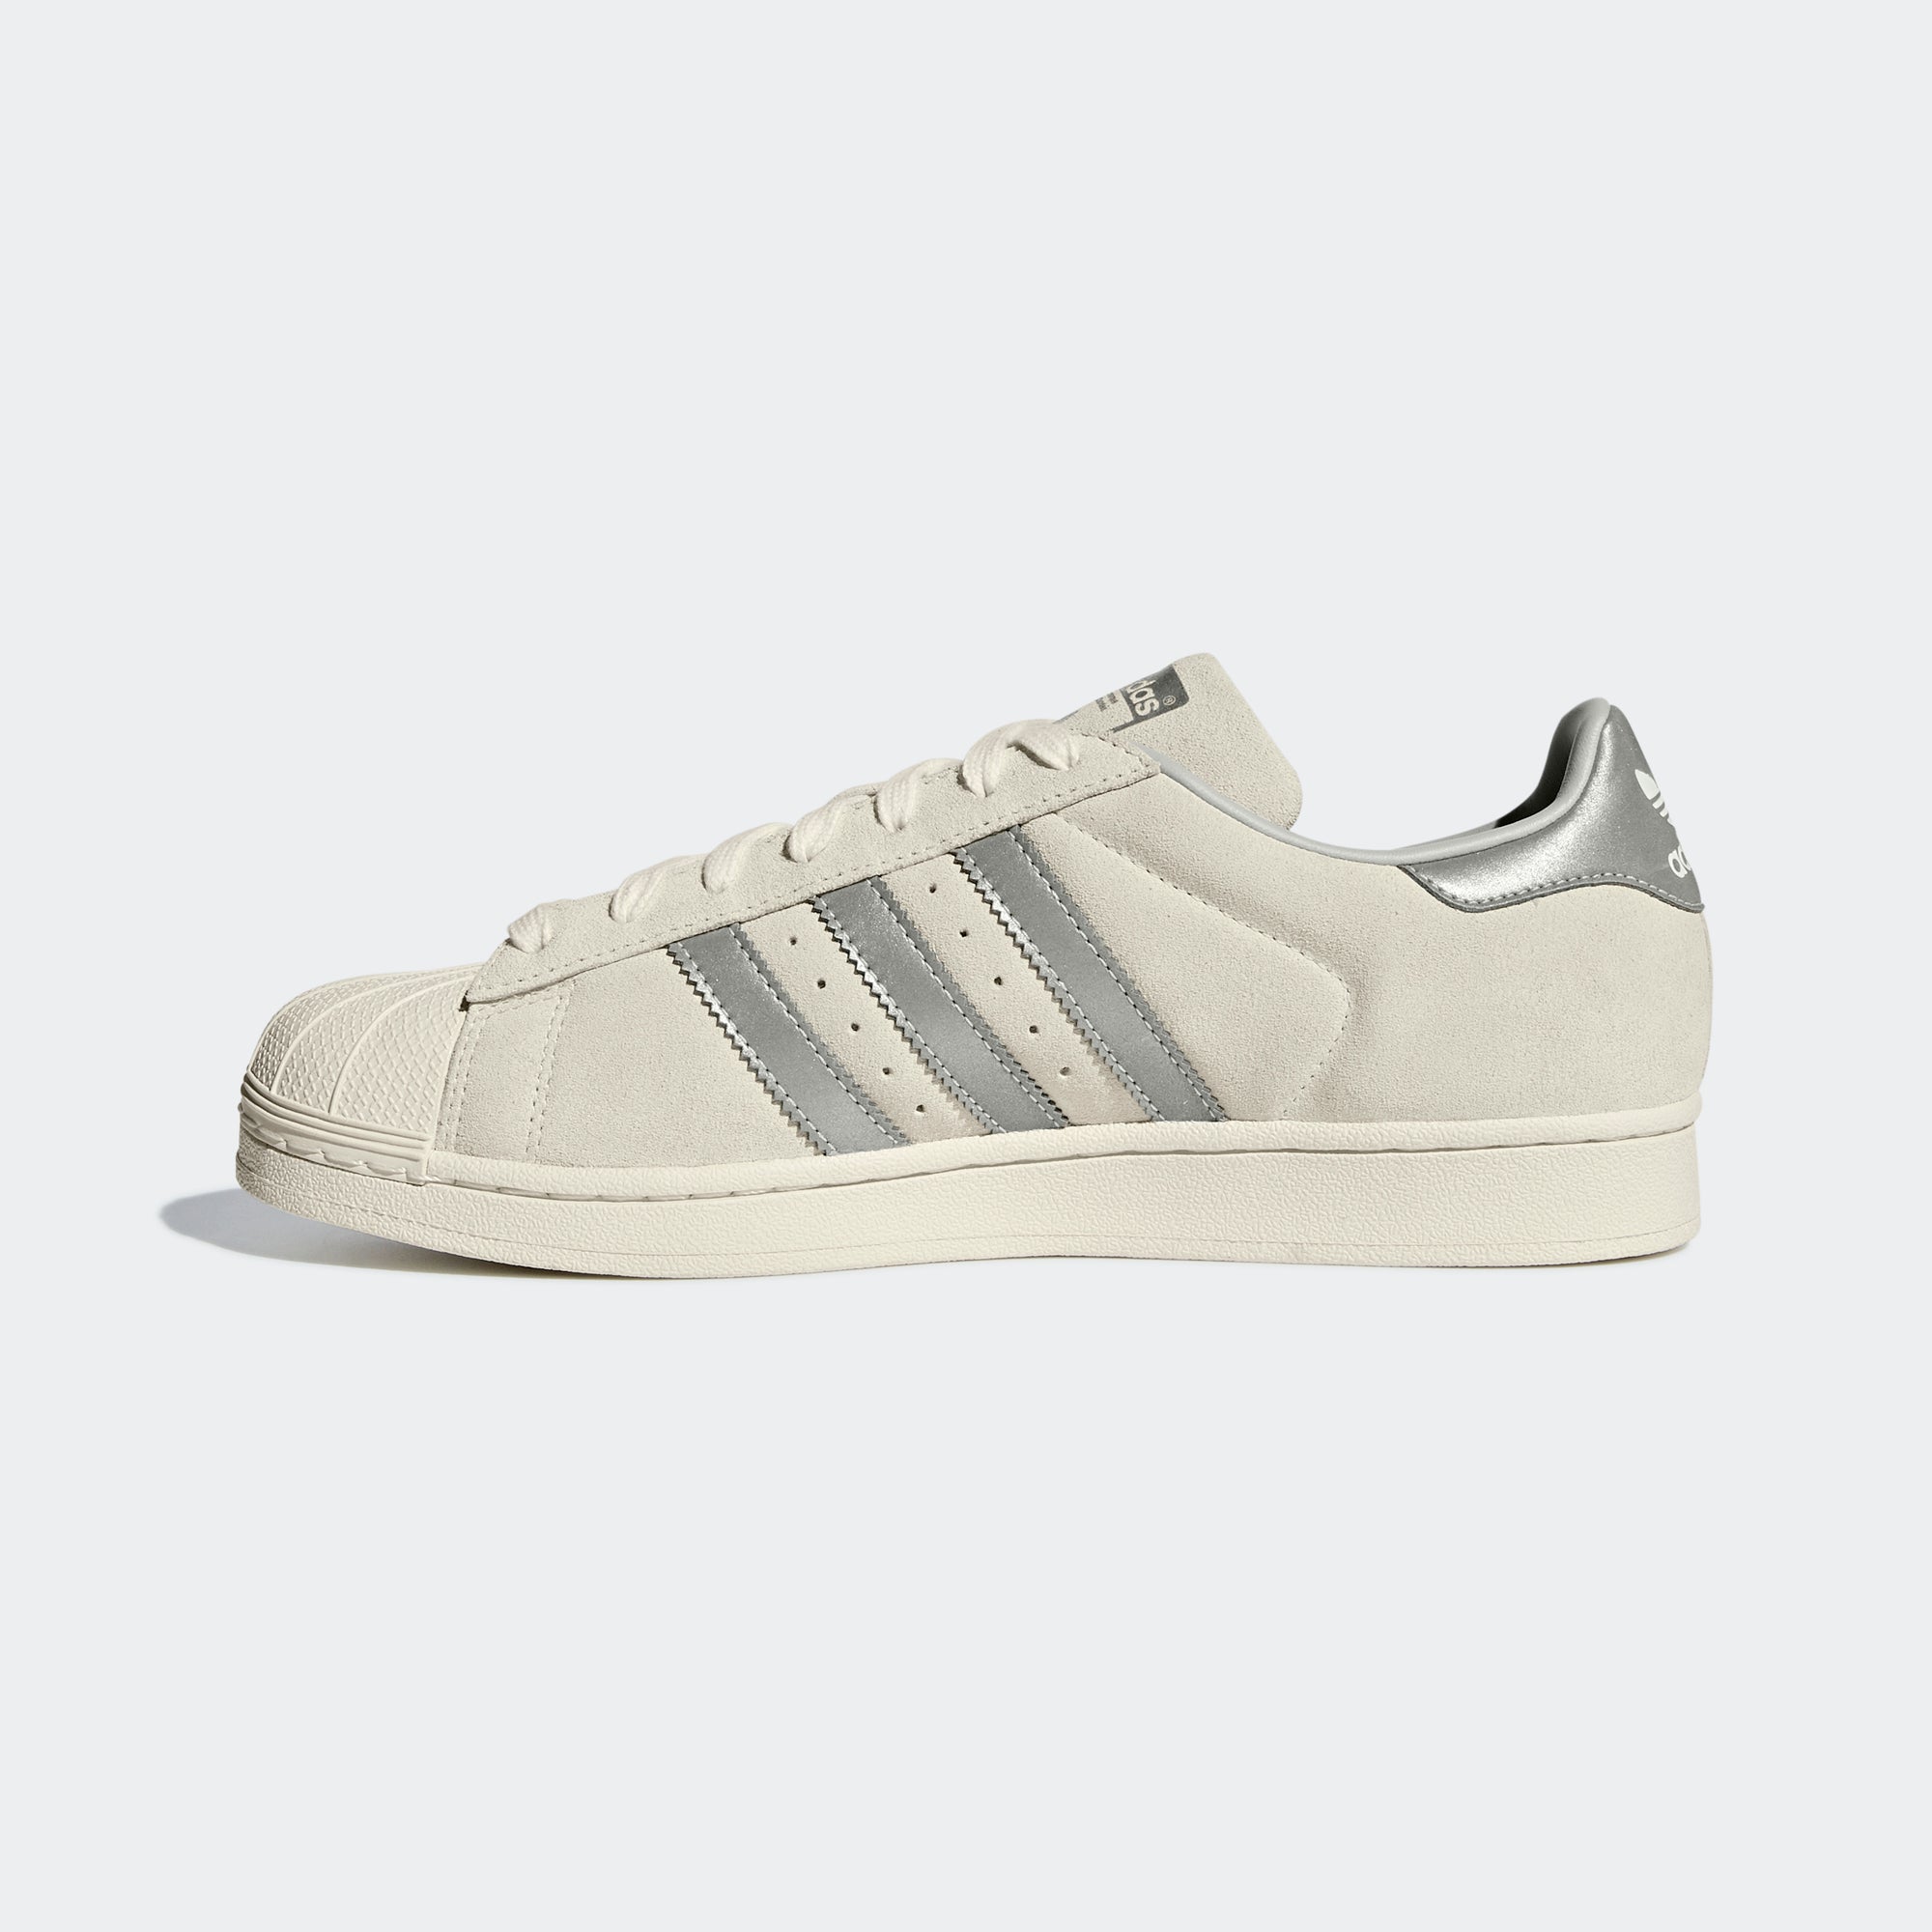 adidas Superstar Shoes Off White B41989 